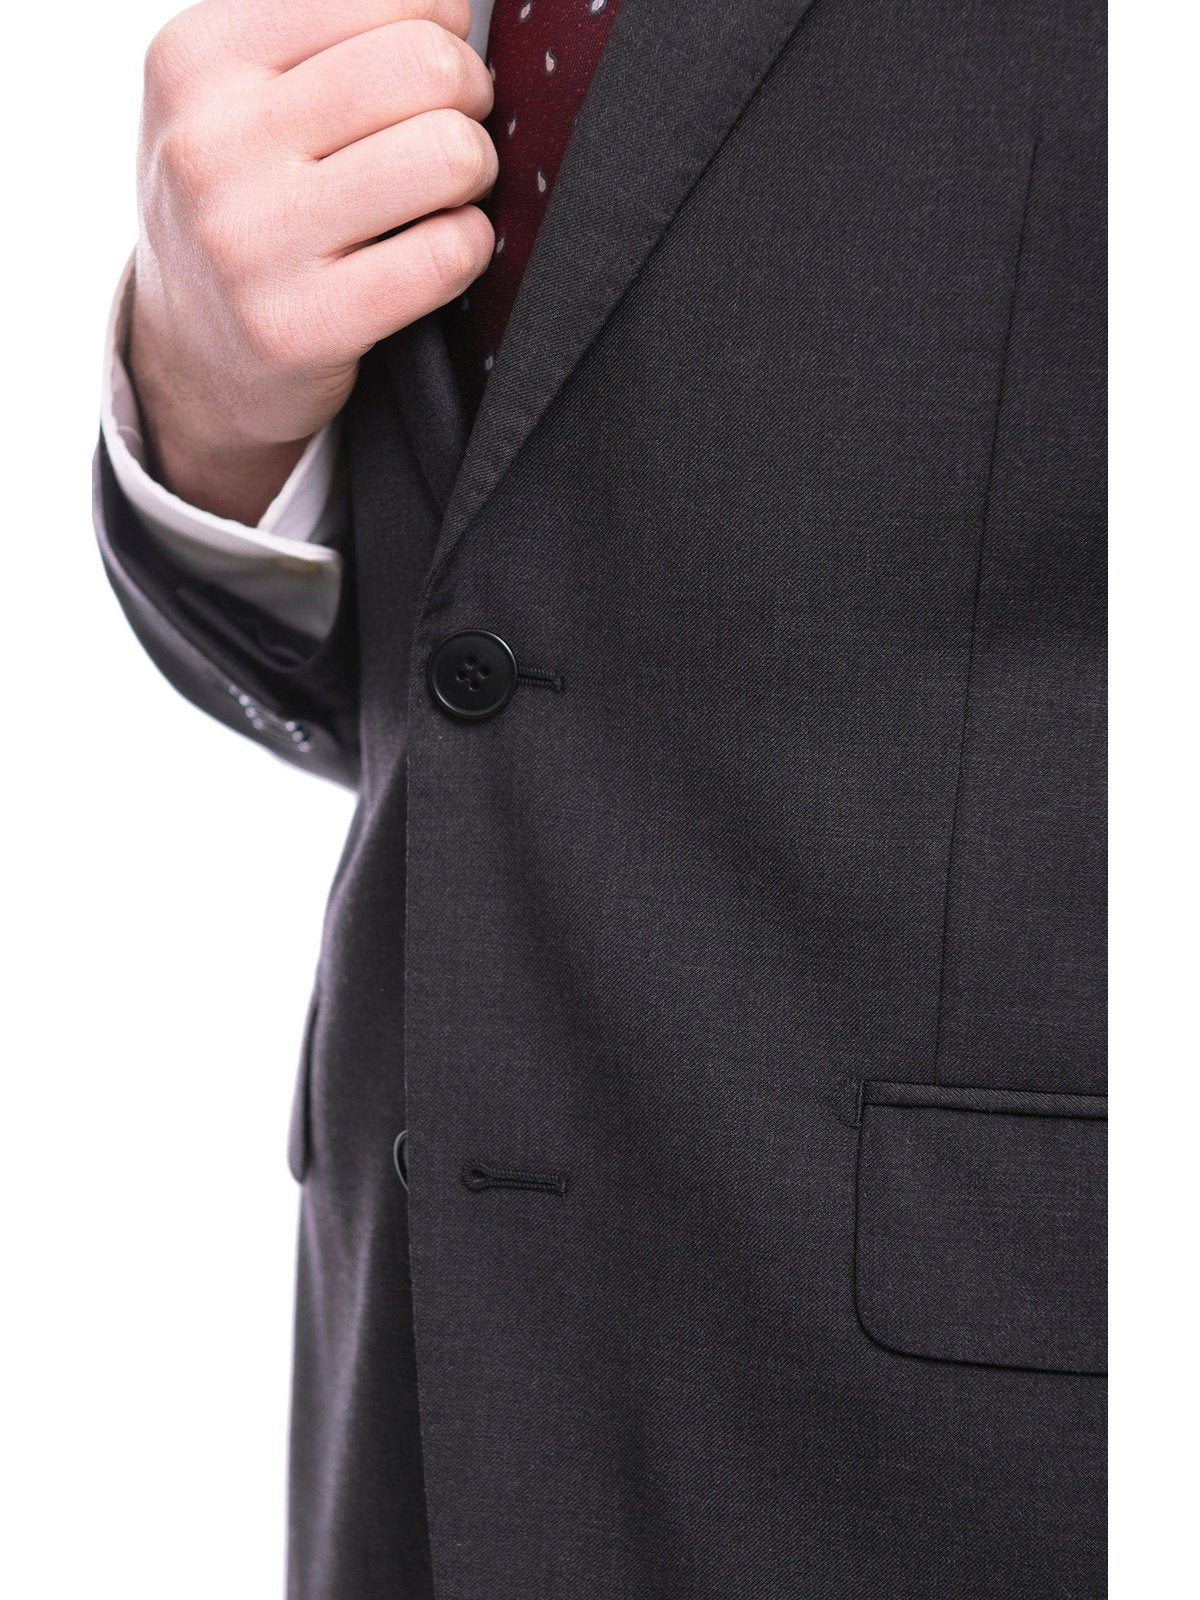 Napoli TWO PIECE SUITS Napoli Slim Fit Charcoal Gray Two Button Half Canvassed Wool Cashmere Suit